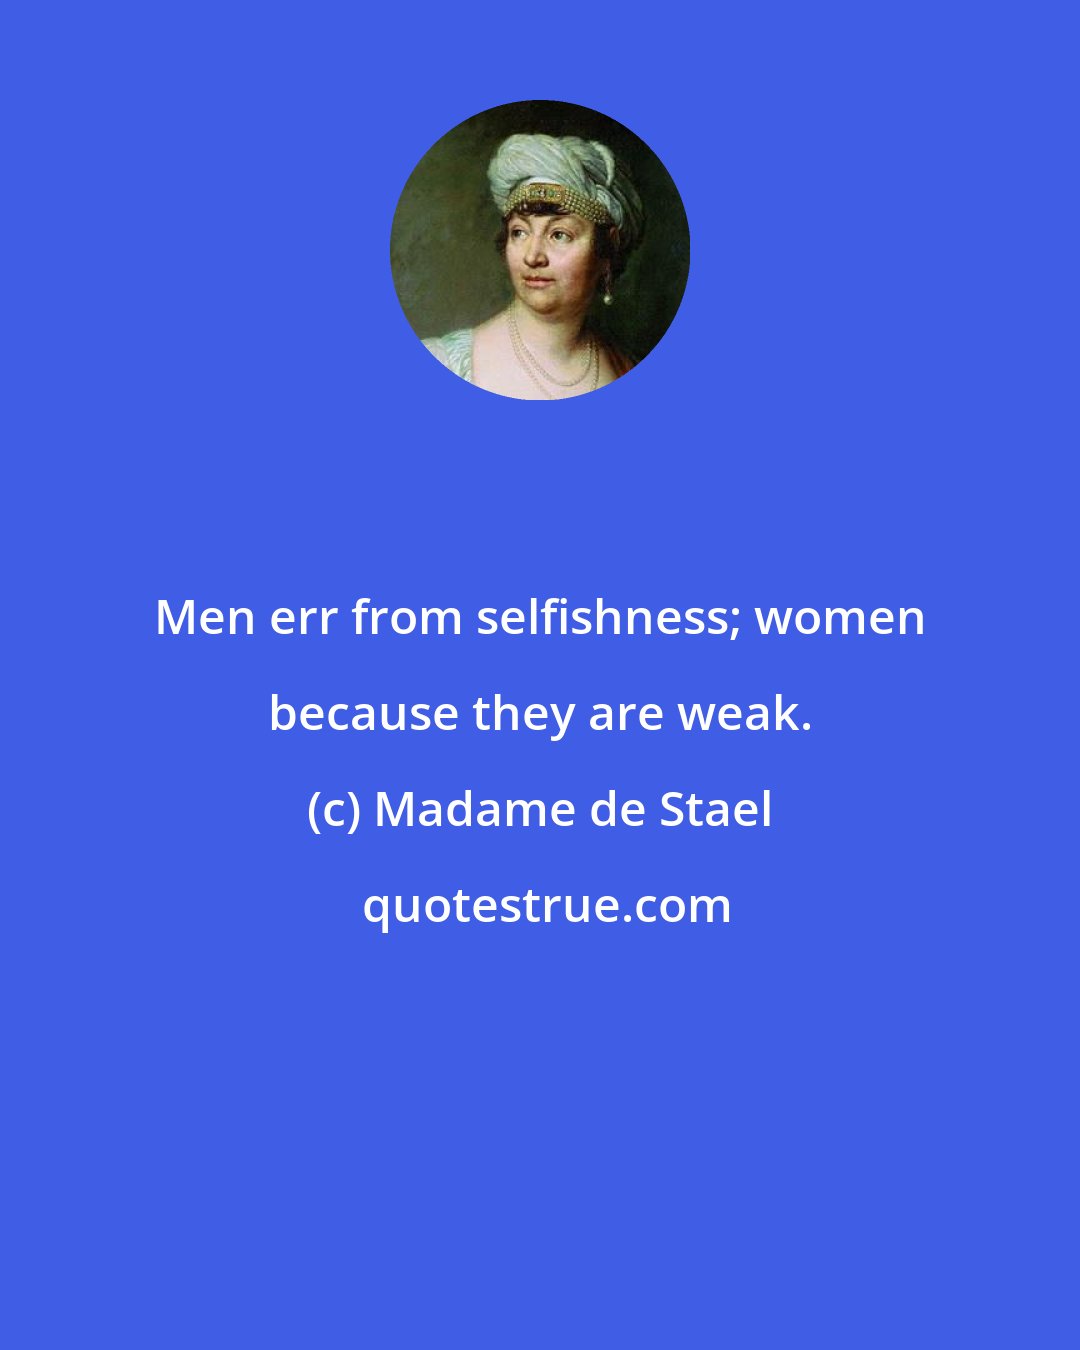 Madame de Stael: Men err from selfishness; women because they are weak.